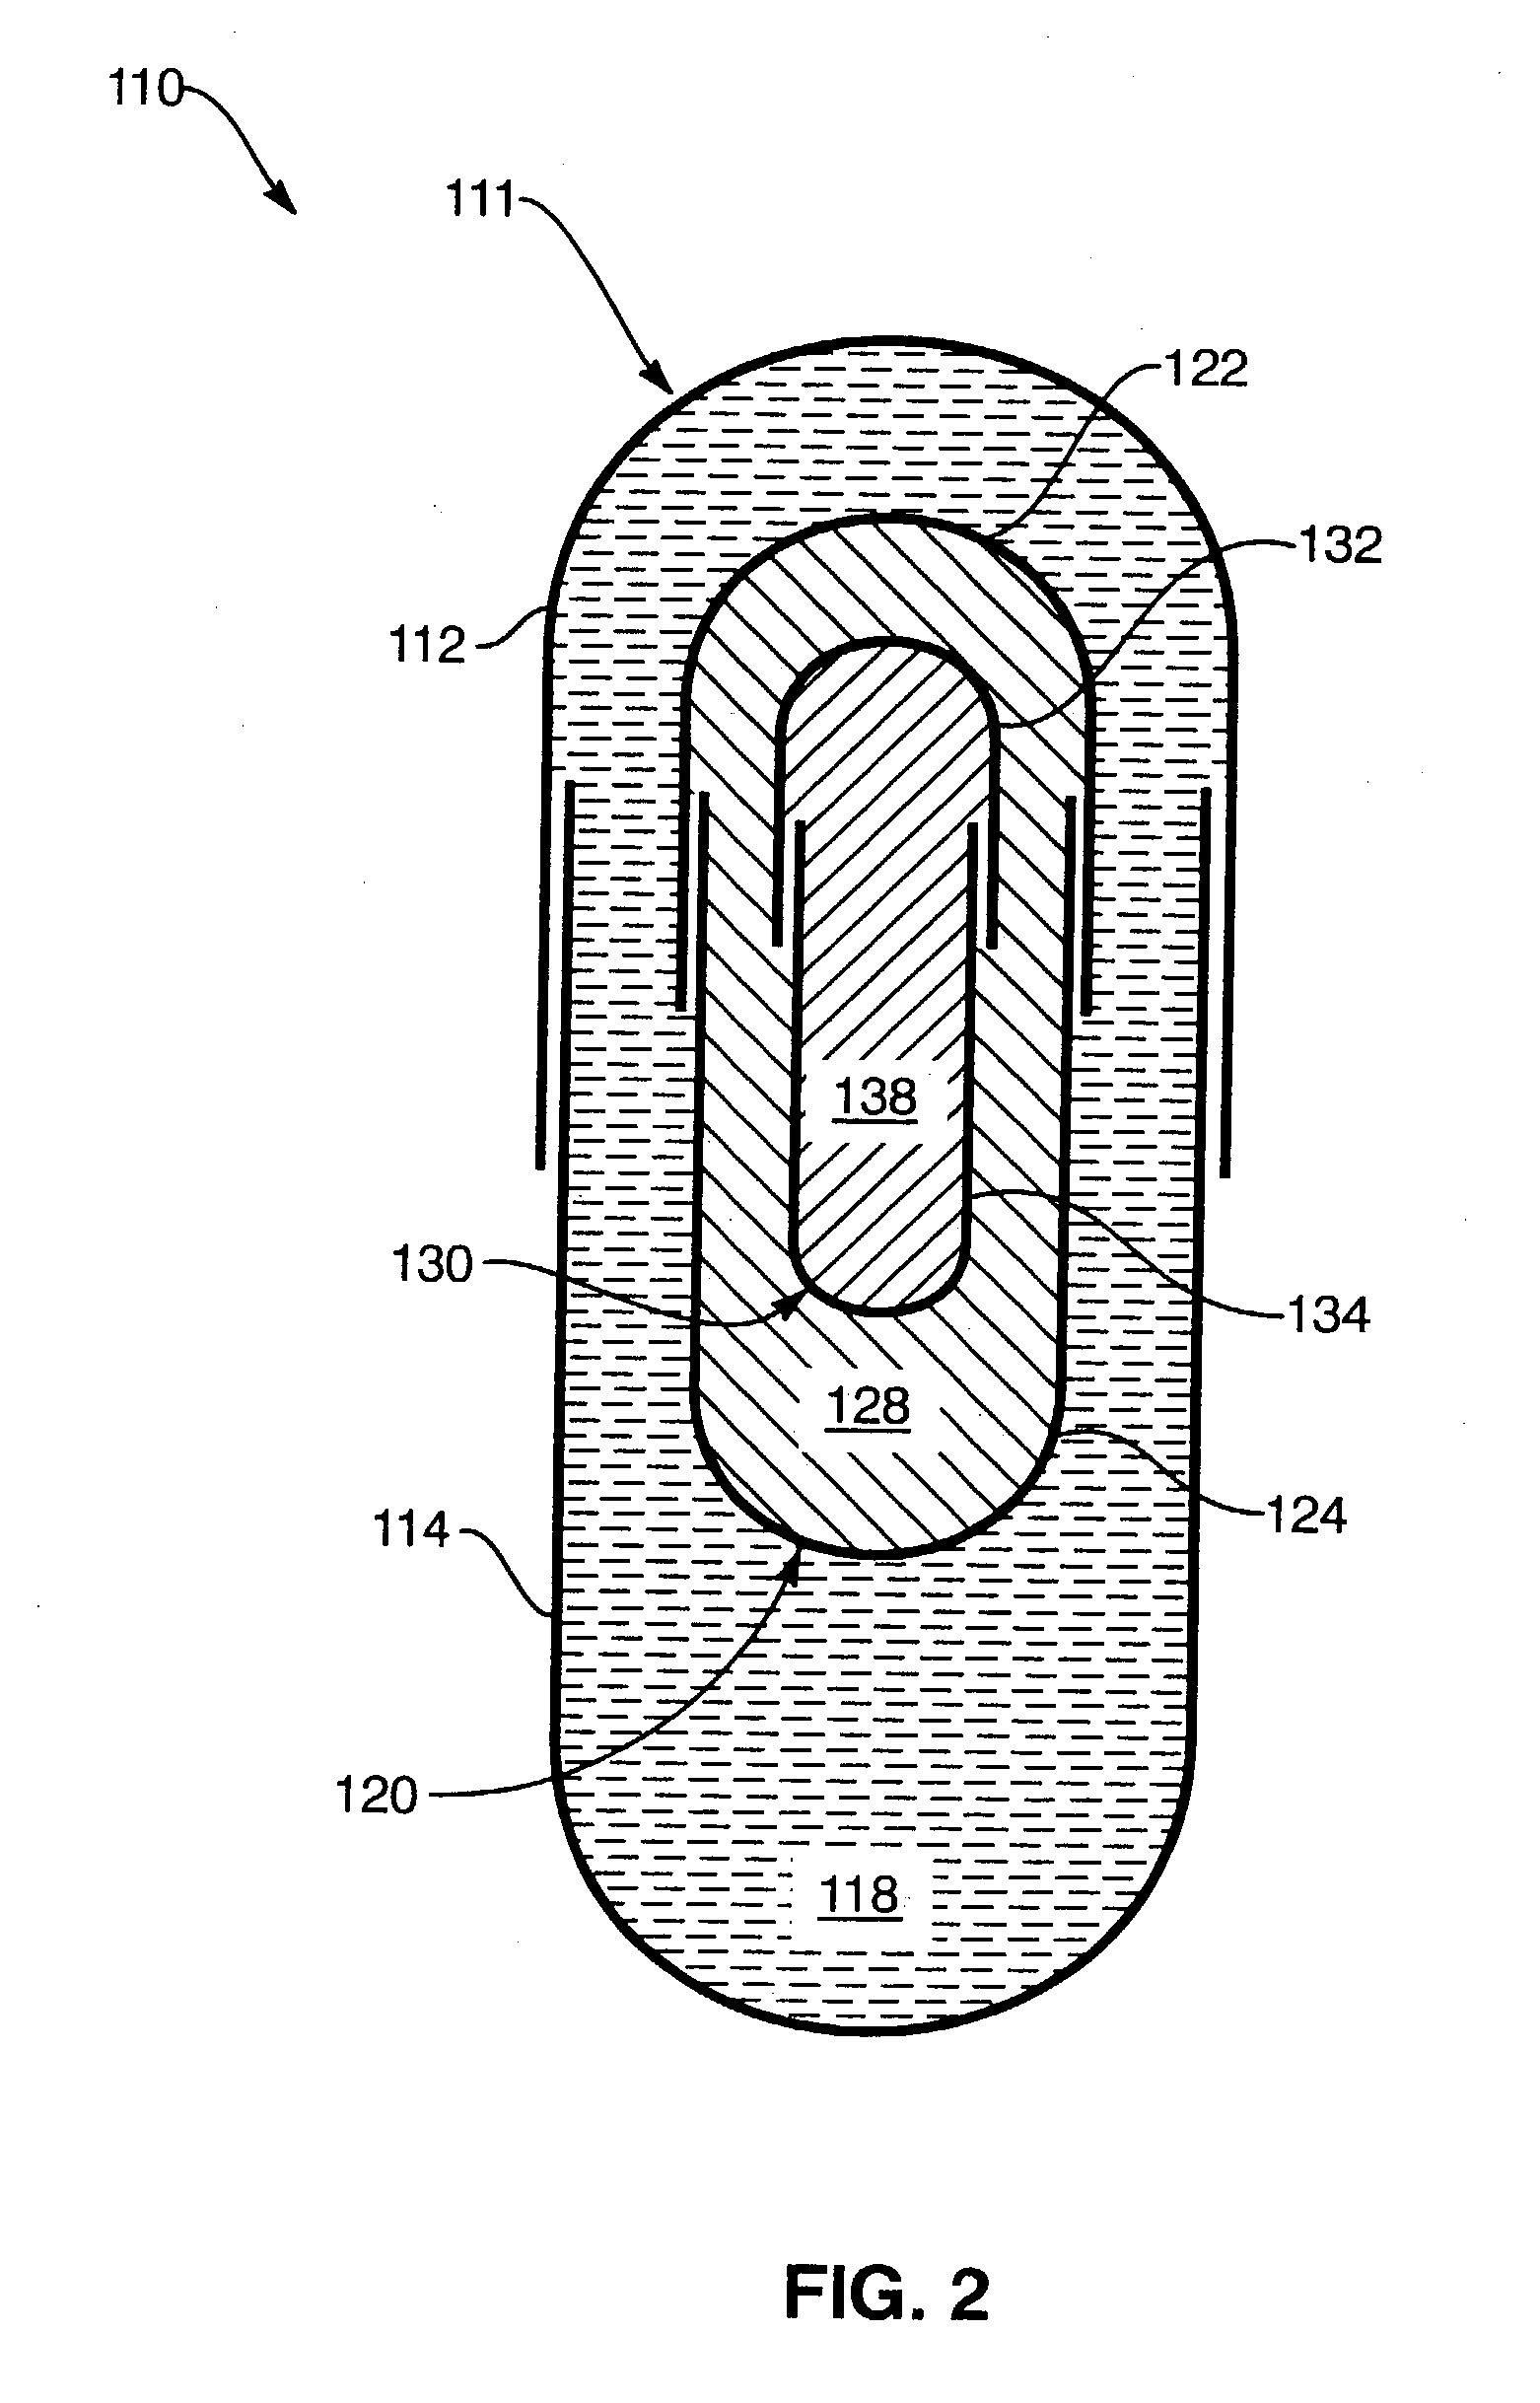 Process for encapsulating multi-phase, multi-compartment capsules for therapeutic compositions